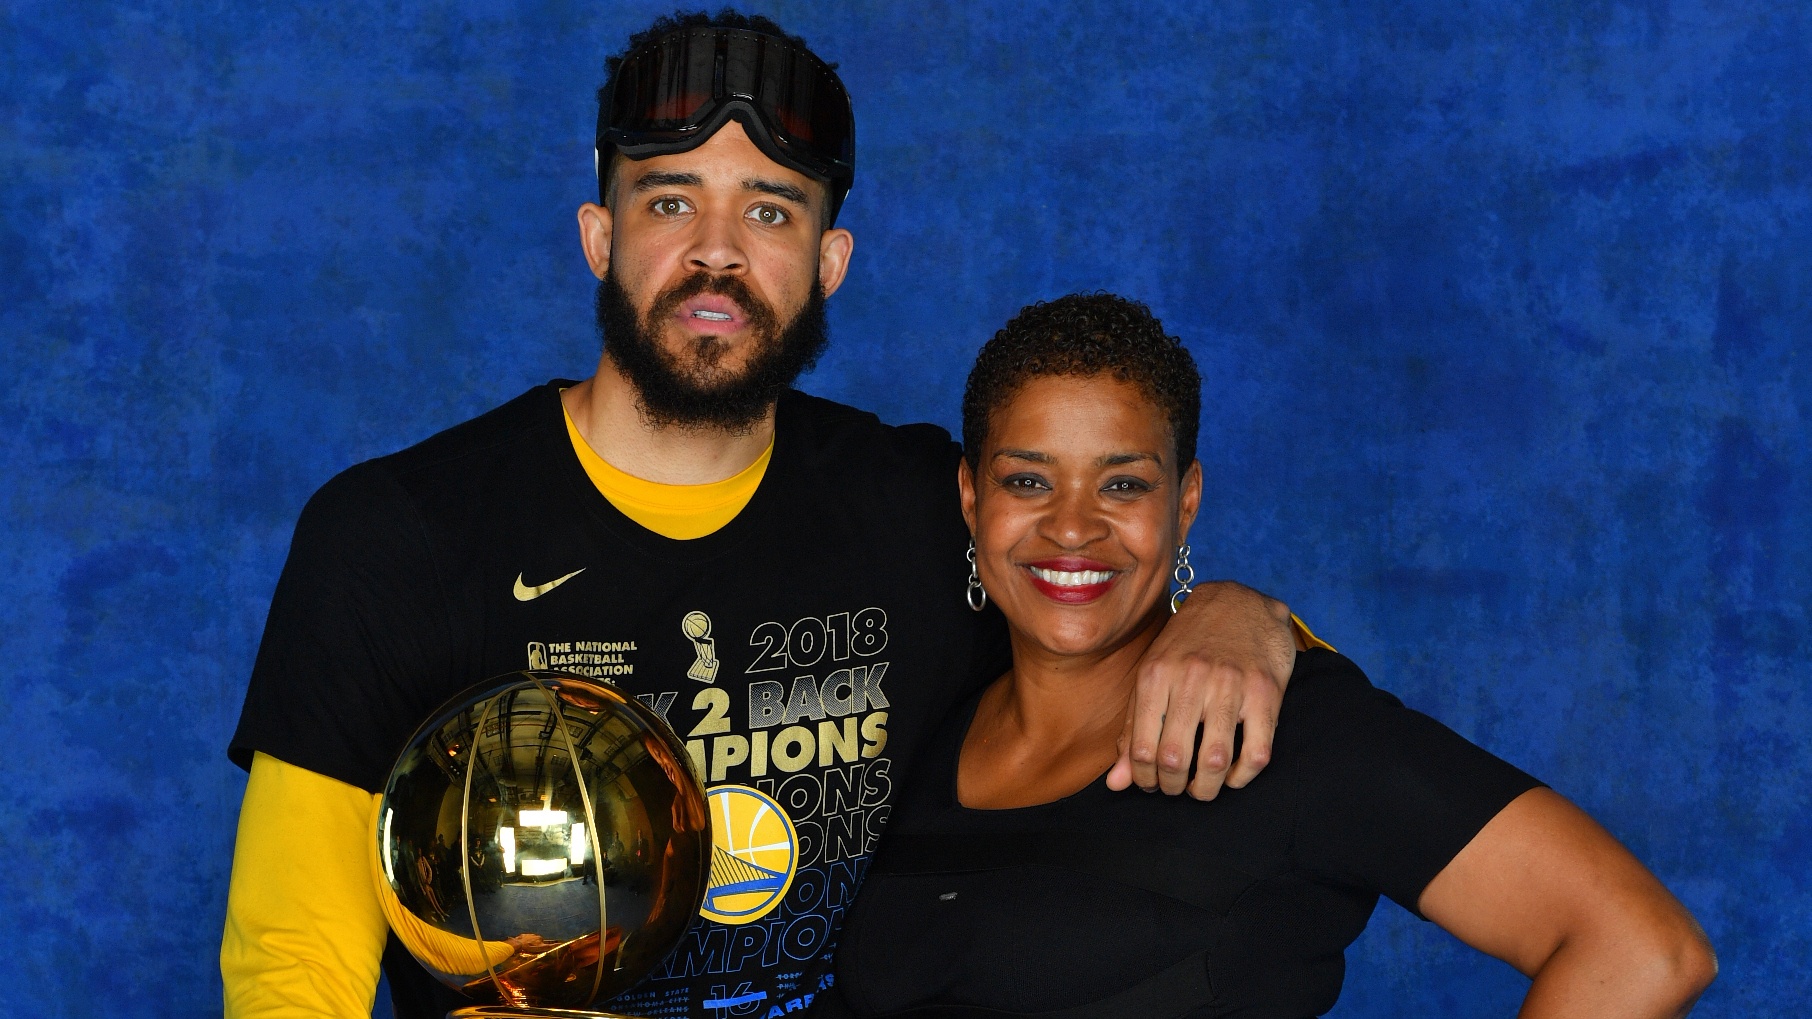 JaVale McGee goes to the Tokyo 2020 Olympics in the footsteps of the family legacy | NBA.com Mexico | The Official Site of the NBA